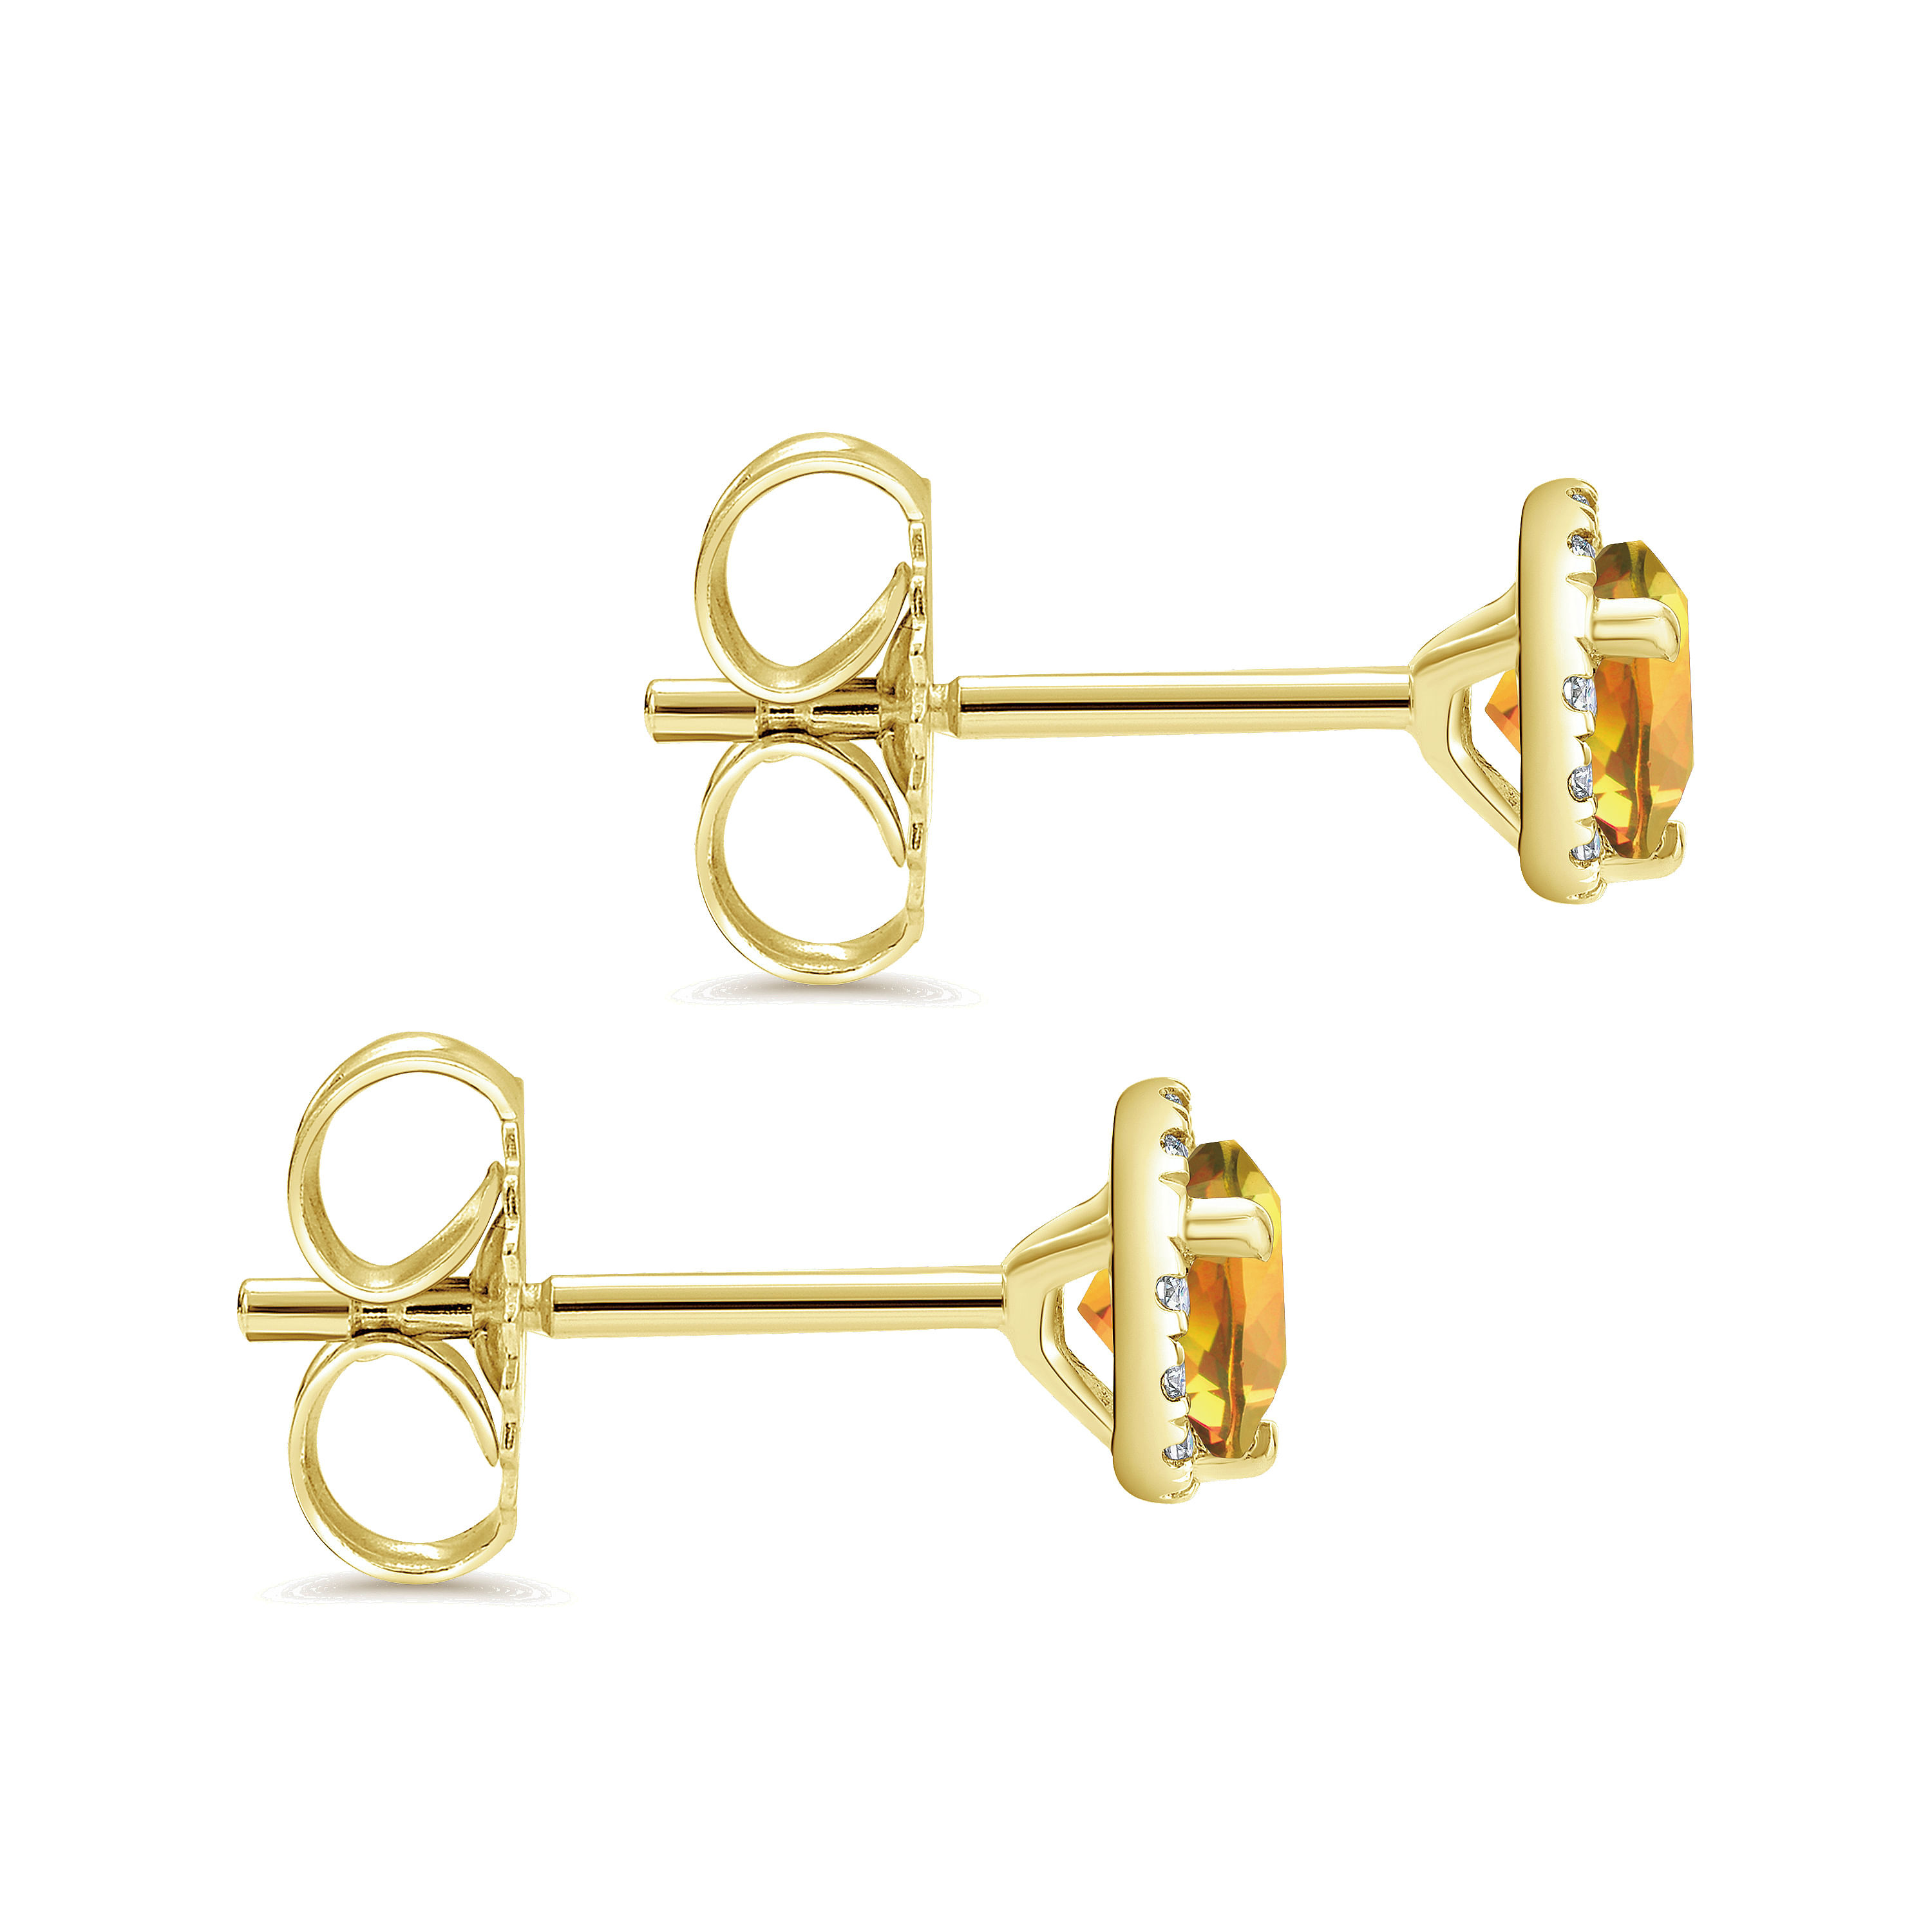 14K Yellow Gold Round Halo Citrine and Diamond Stud Earrings